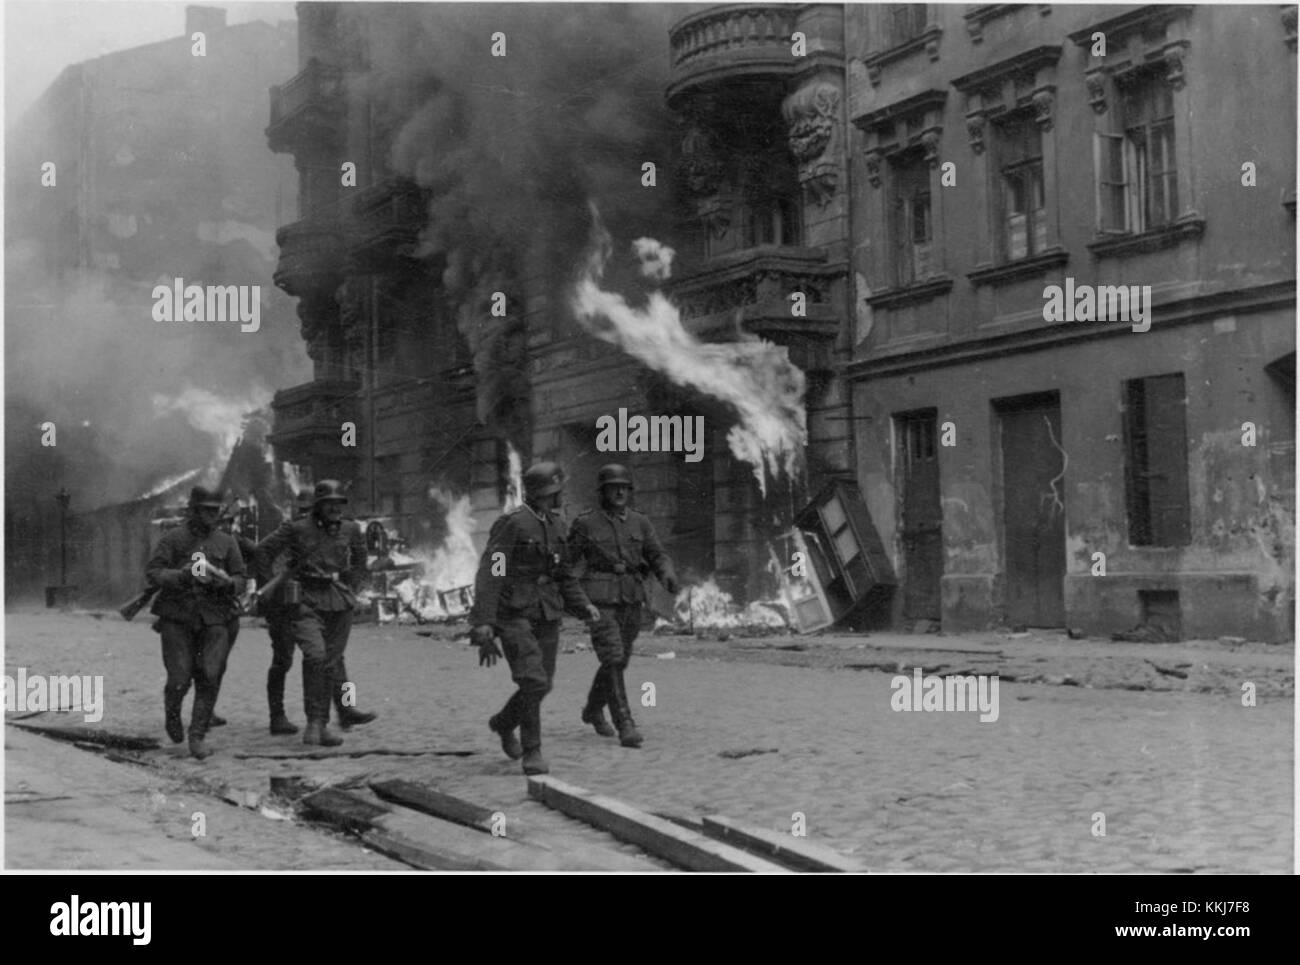 Stroop Report 2/4 Record Group 038 United States Counsel for the Procurution of Axis criminality; United States Exhibits, 1933-46 HMS Asset Id: HF1-88454435 numero riscoperta: 06315 Ghetto Uprising Warsaw2 Foto Stock